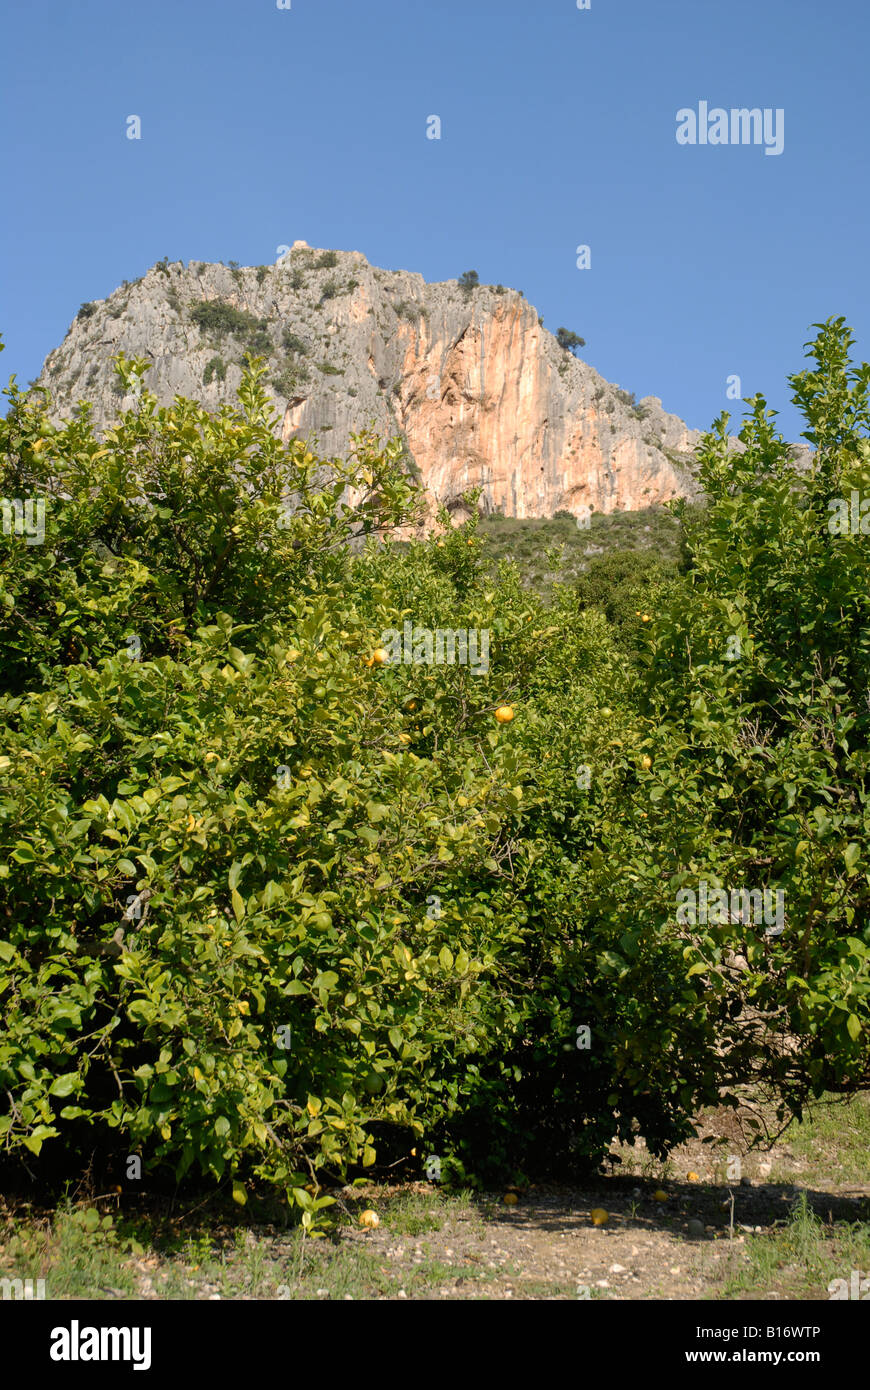 orchard of lemon trees, Pedreguer, Alicante Province, Spain Stock Photo